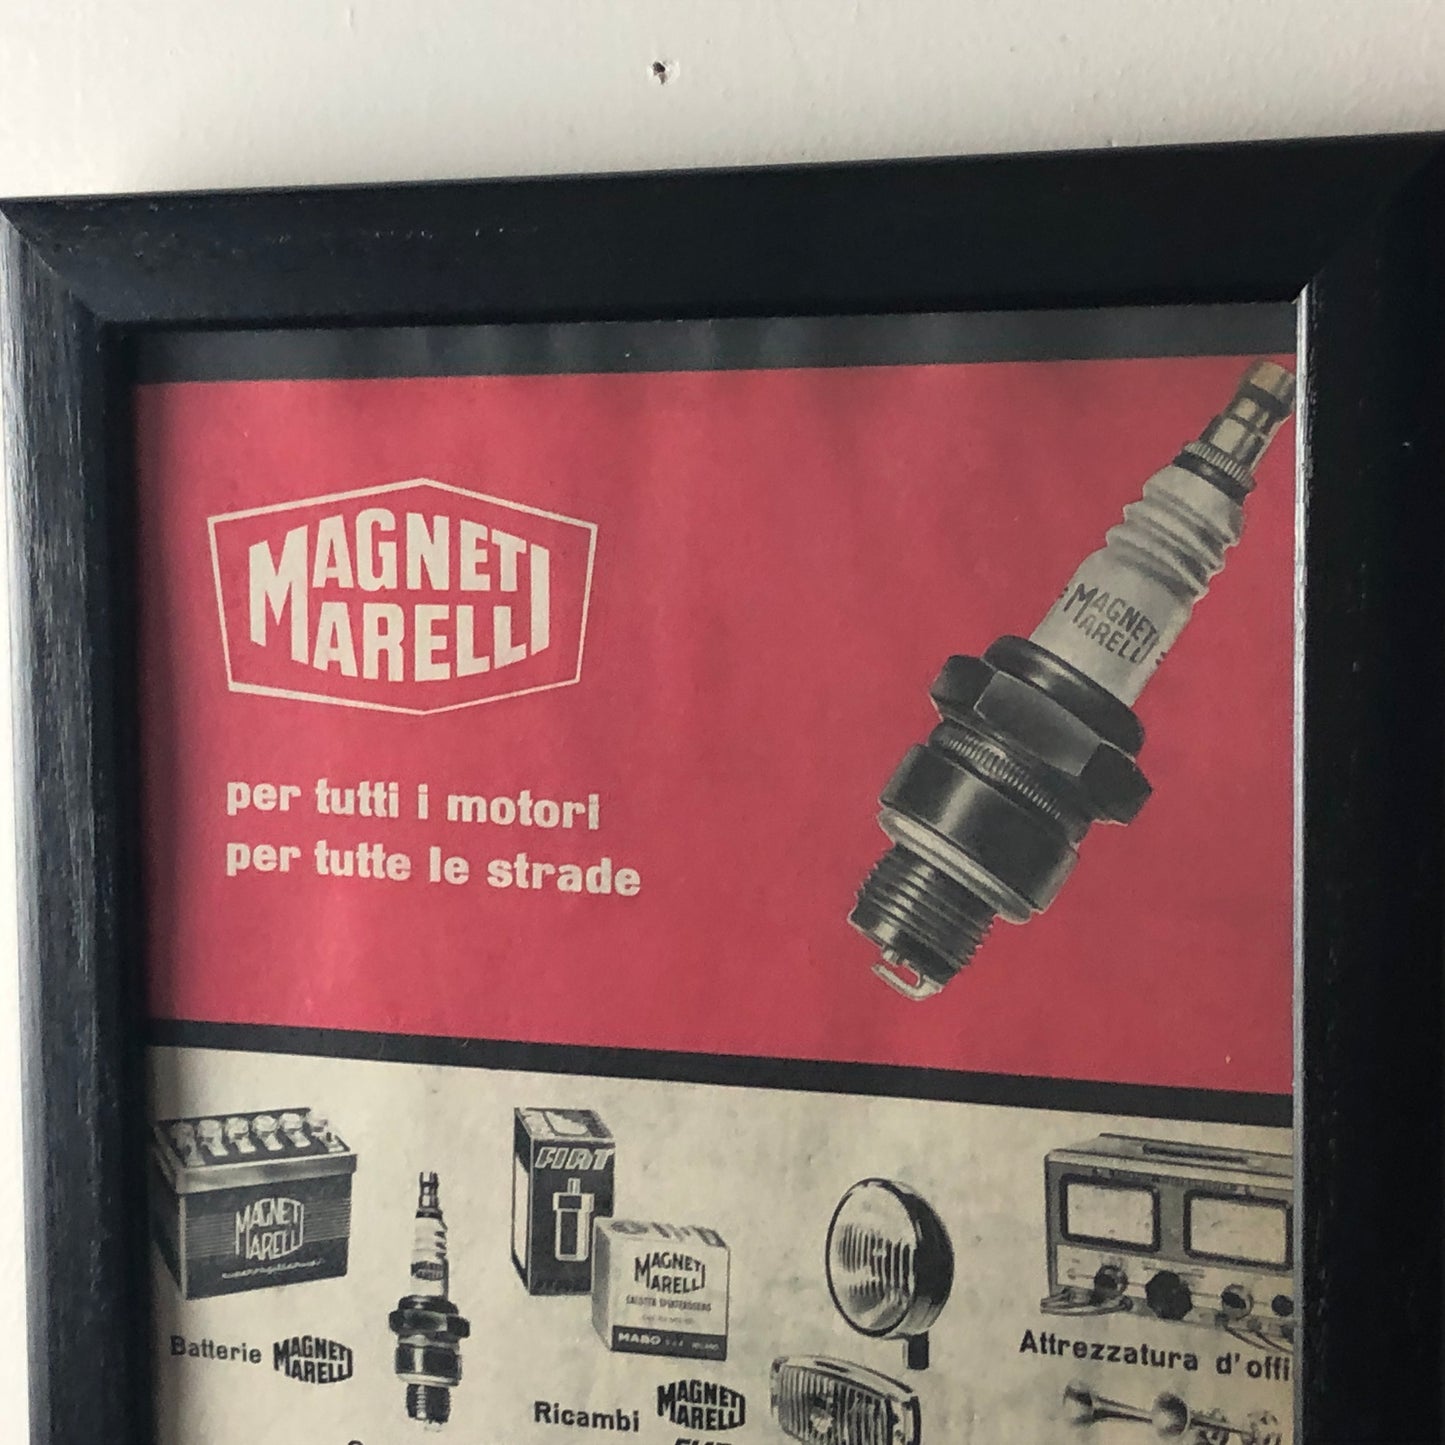 Magneti Marelli, Advertising Year 1960 Magneti Marelli For All Engines For All Roads